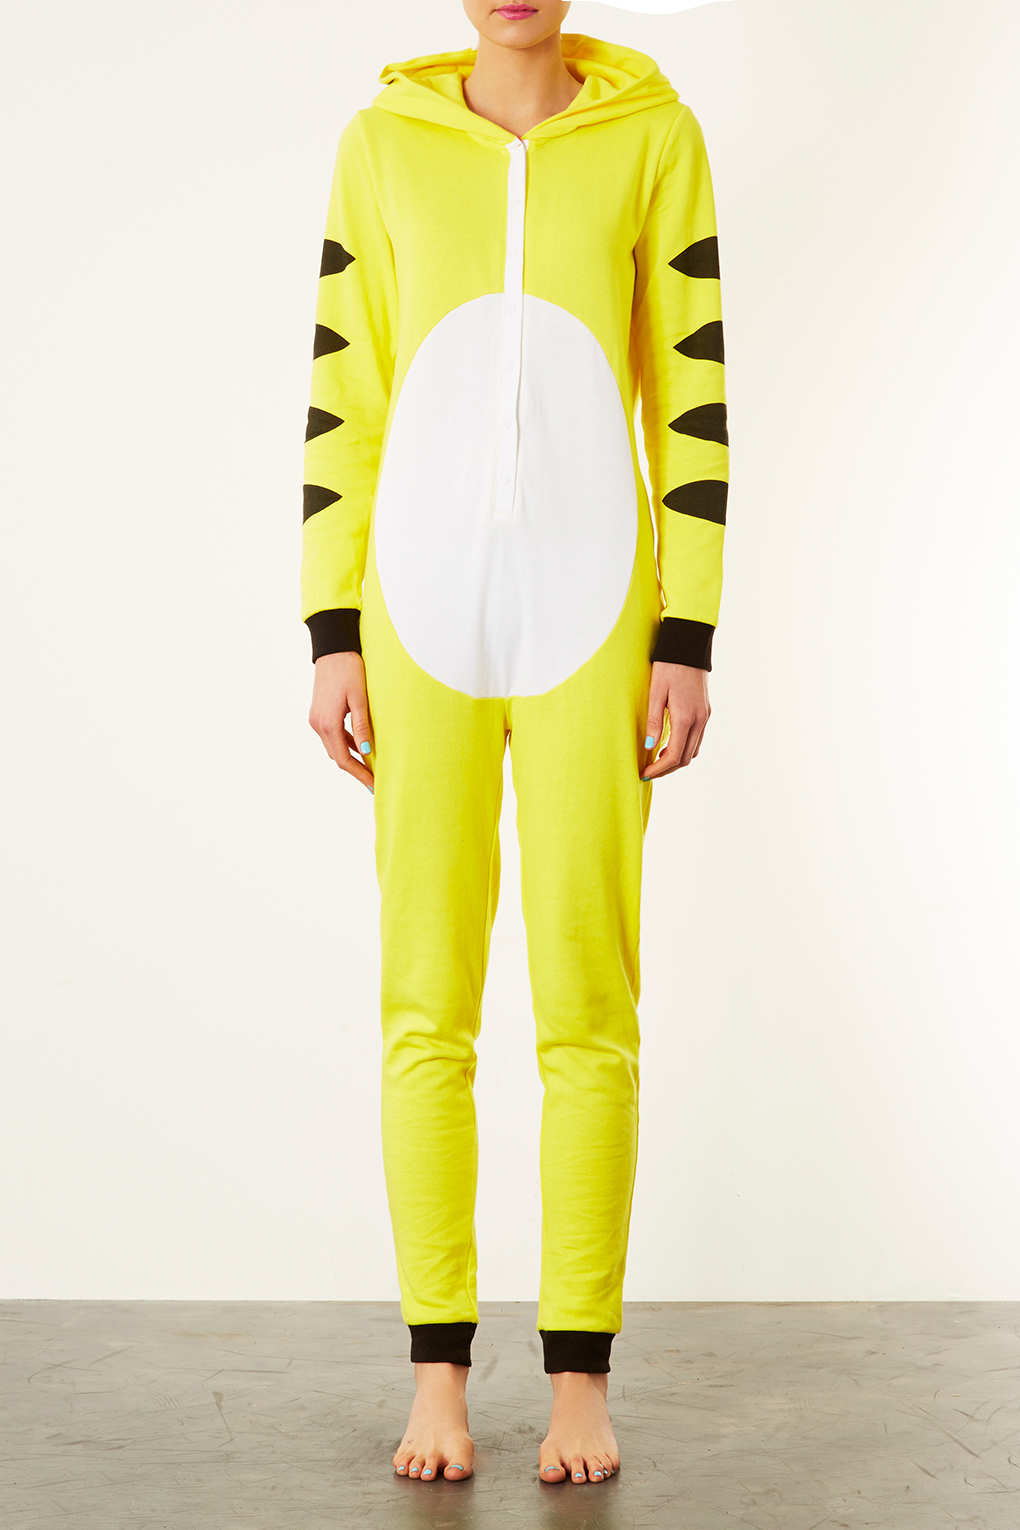 Image result for TopShop YELLOW TIGER ONESIE